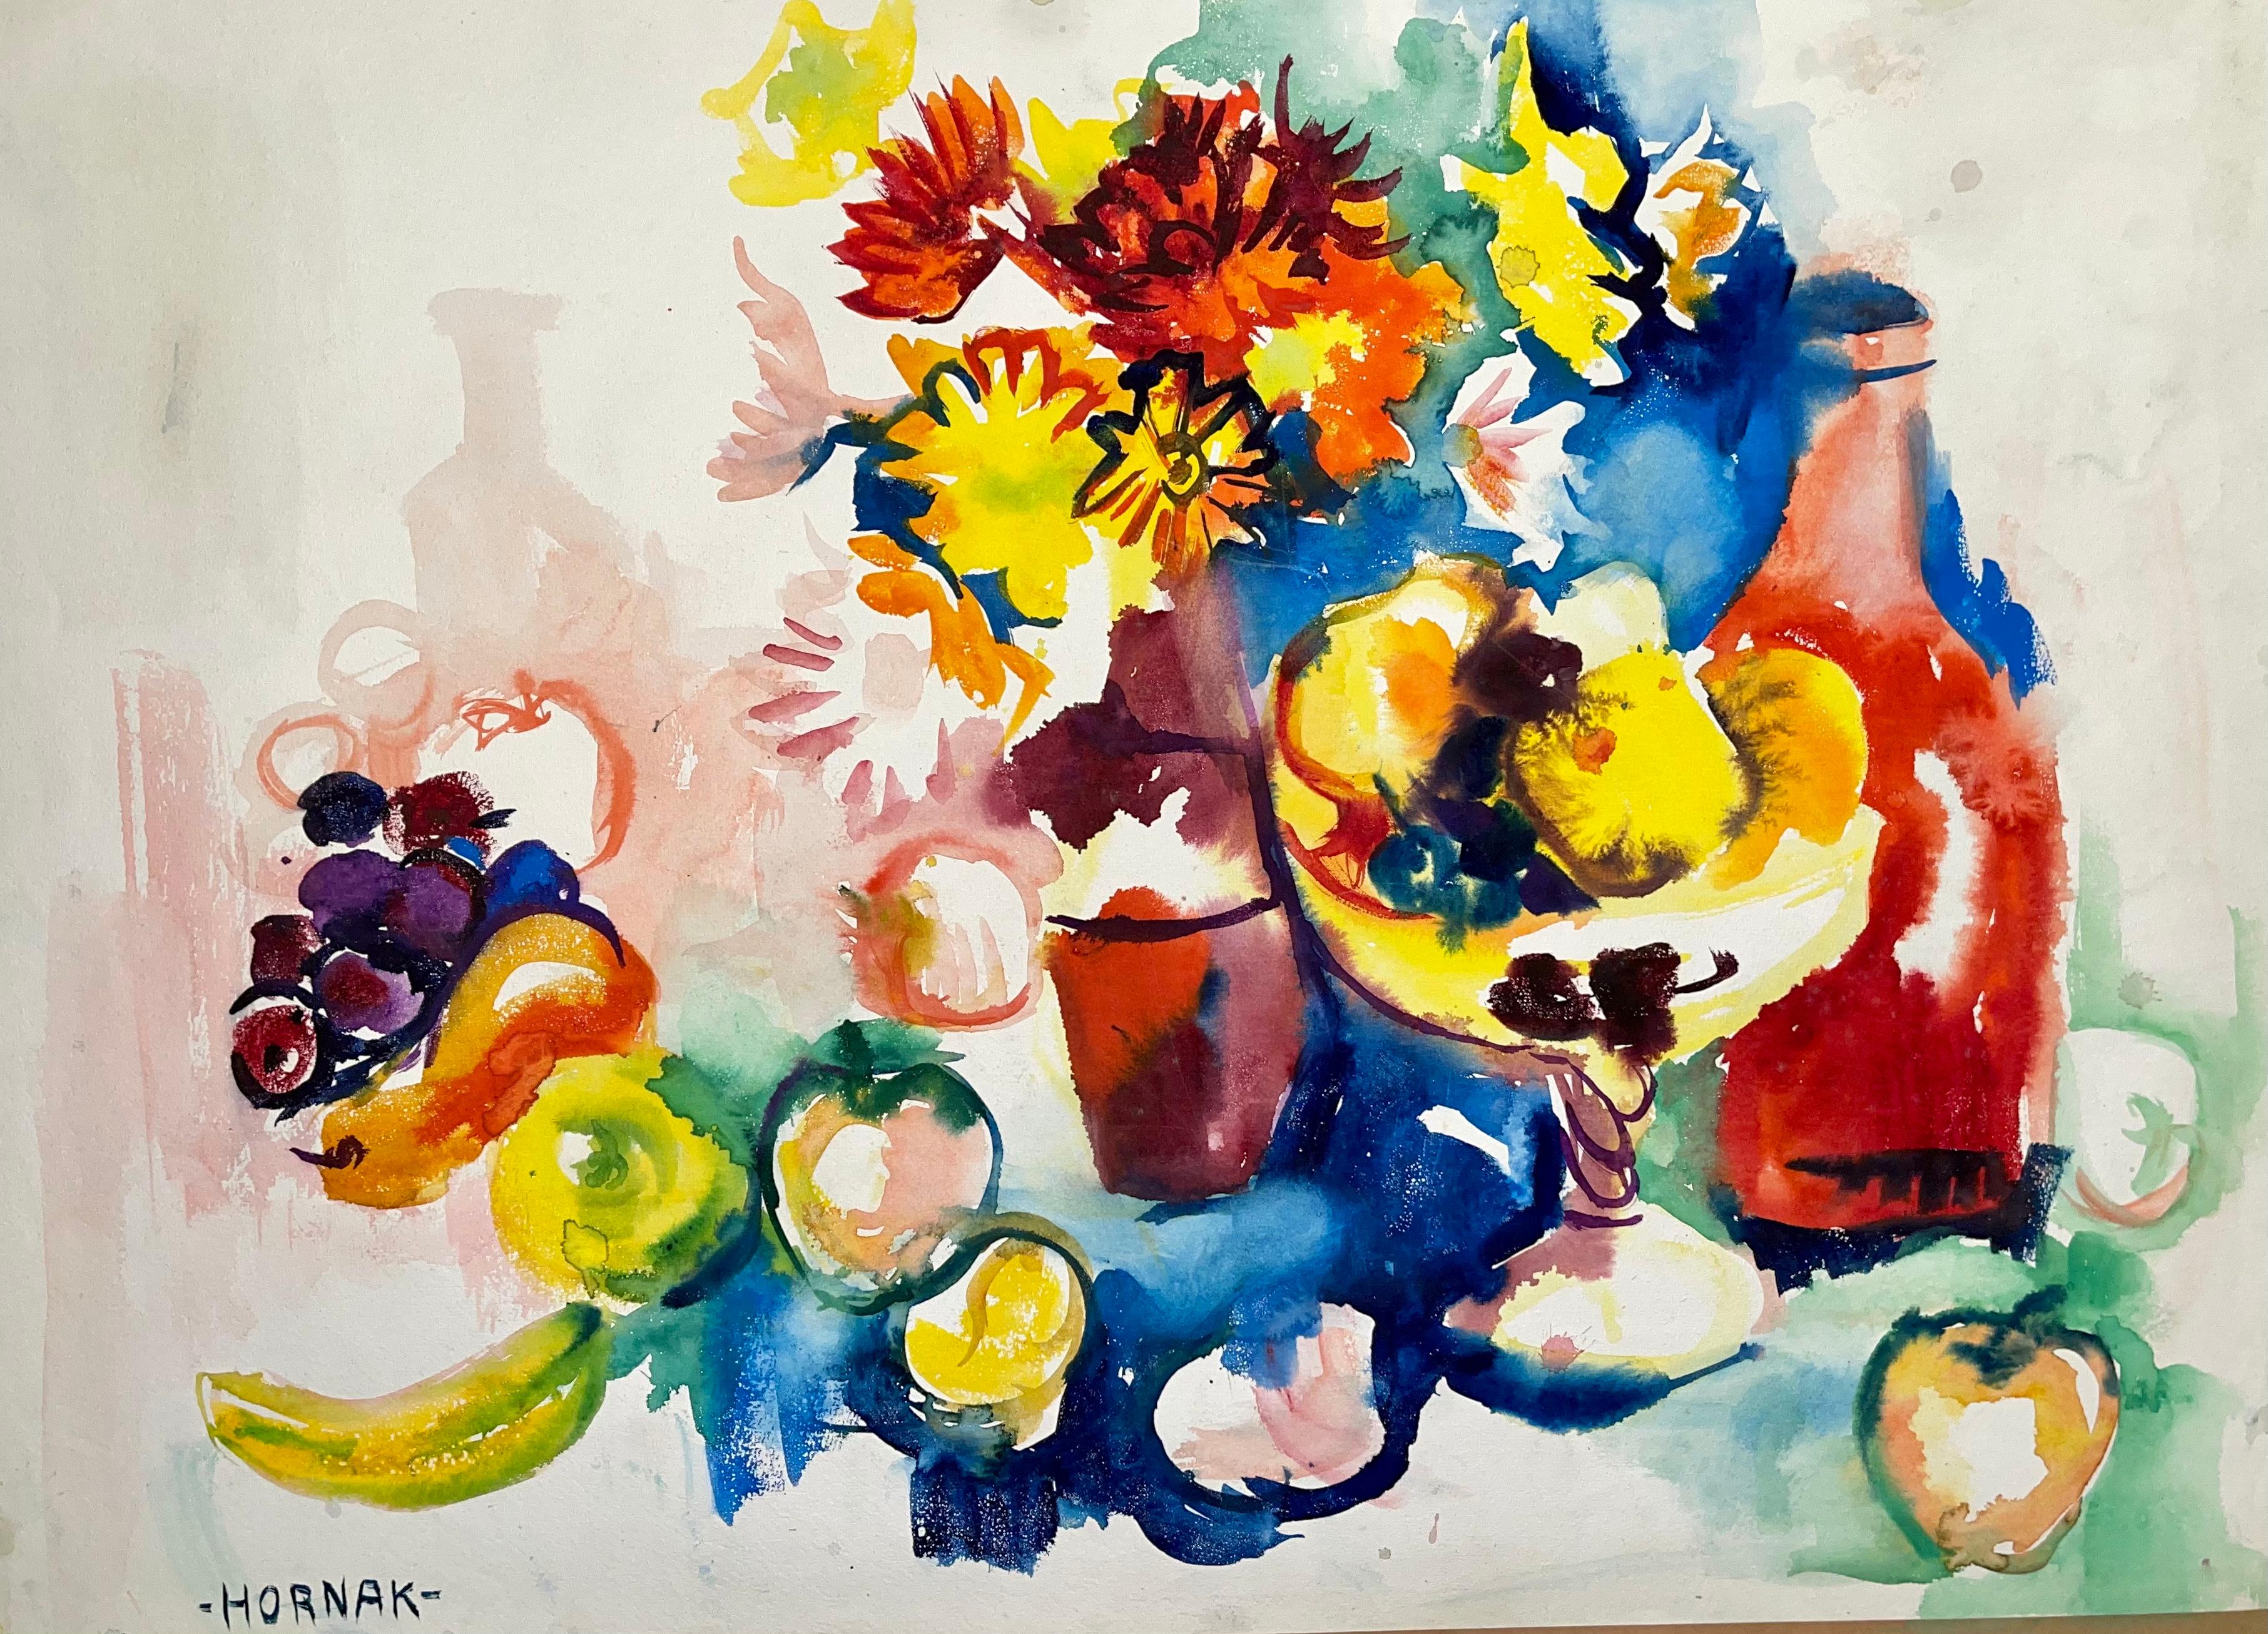 Ian Hornak Interior Painting - Untitled (Abstract Still Life with Flowers, Fruit and Bottle)